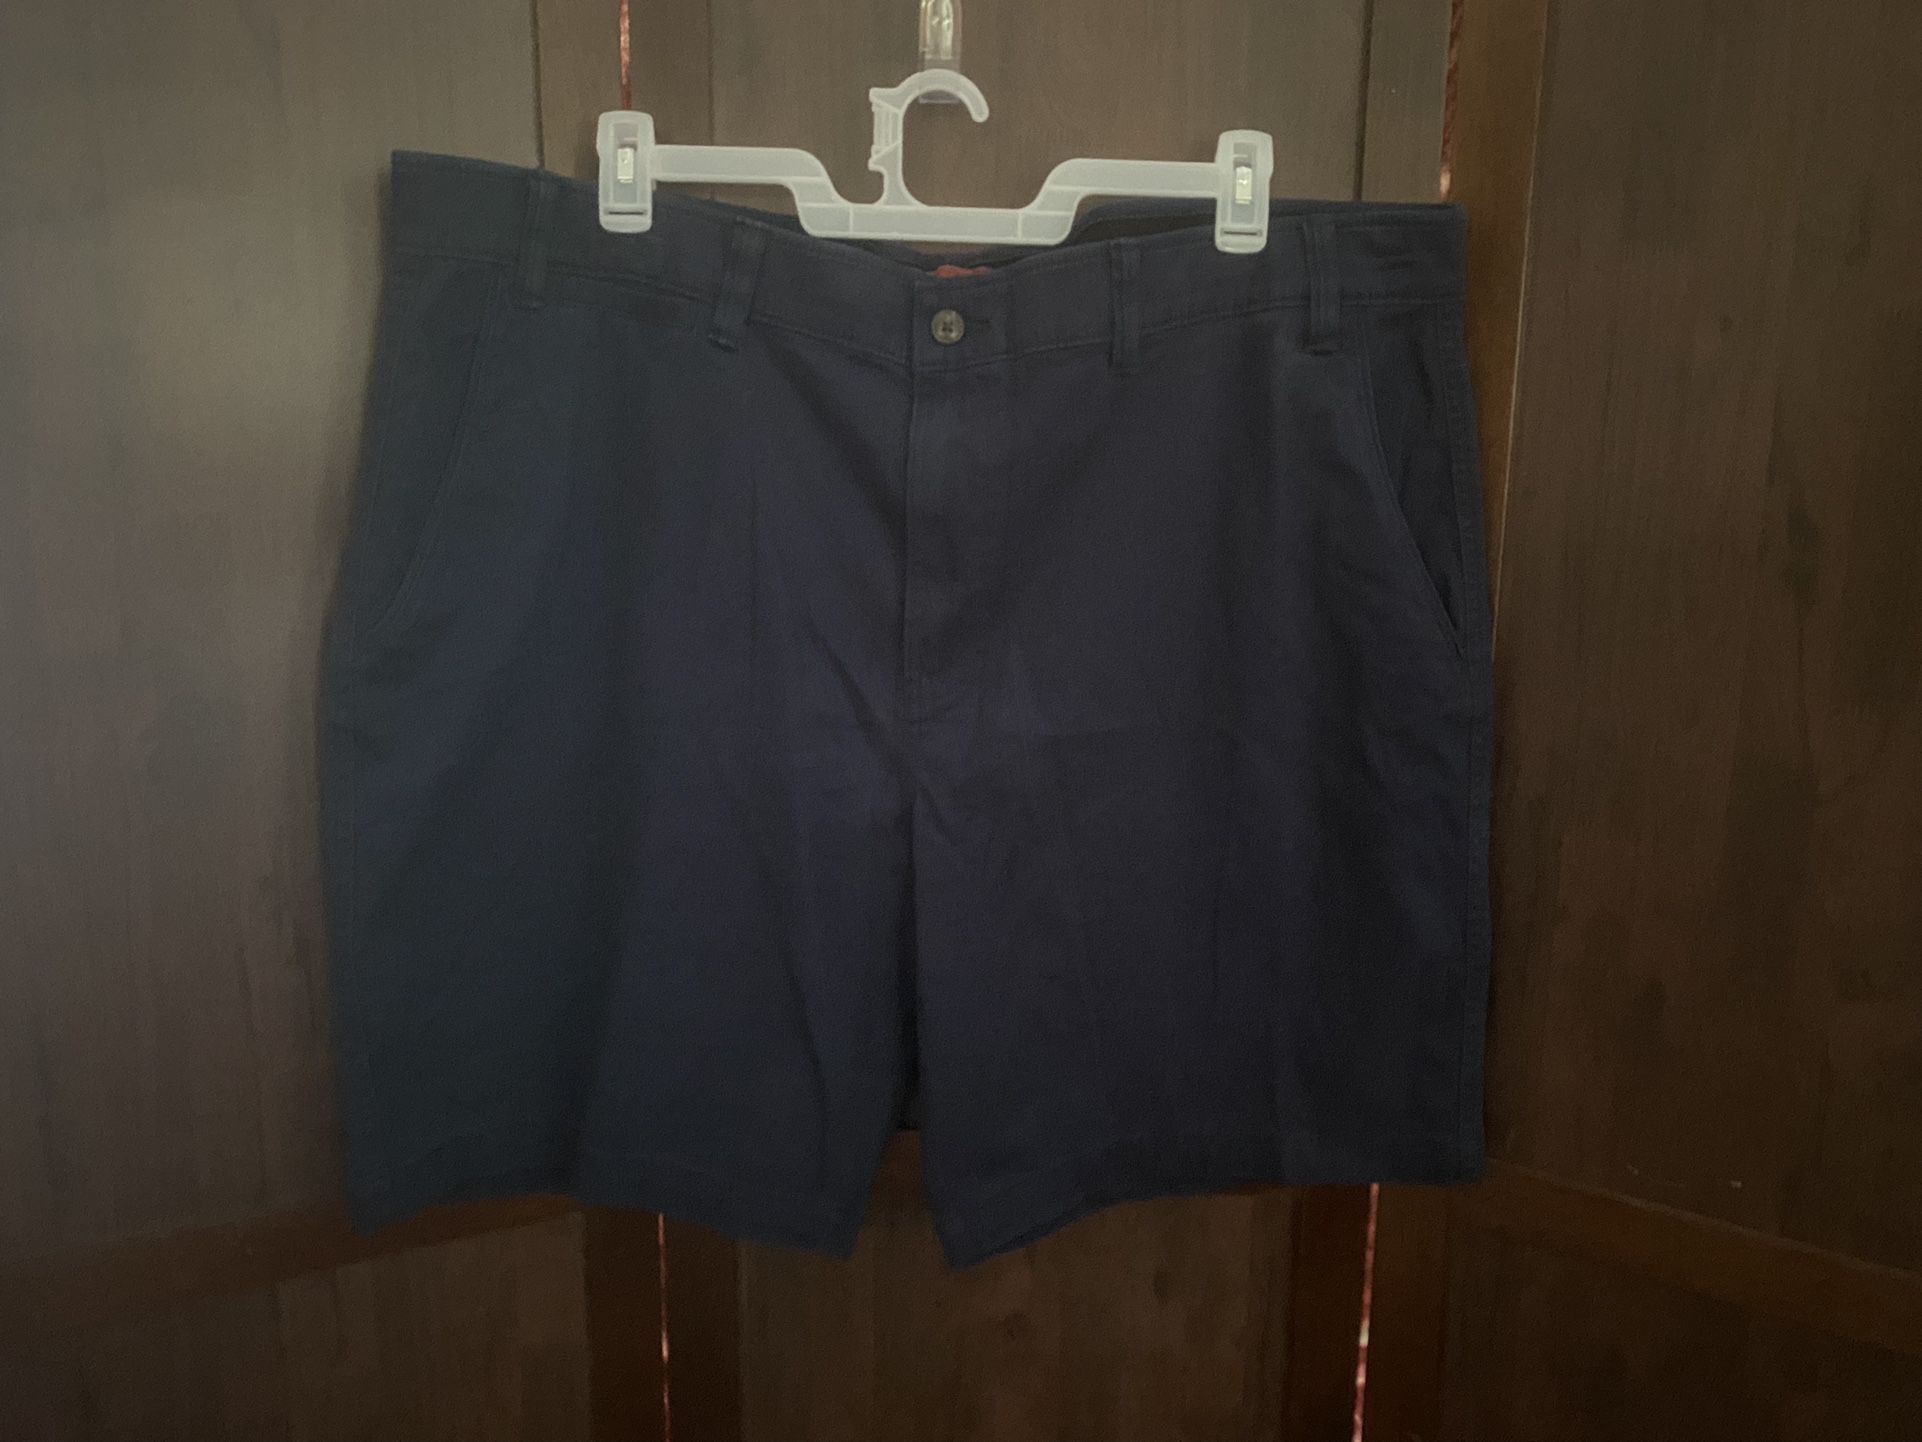 Foundry Men’s Size 50 Big And Tall Navy Blue Shorts NWOT